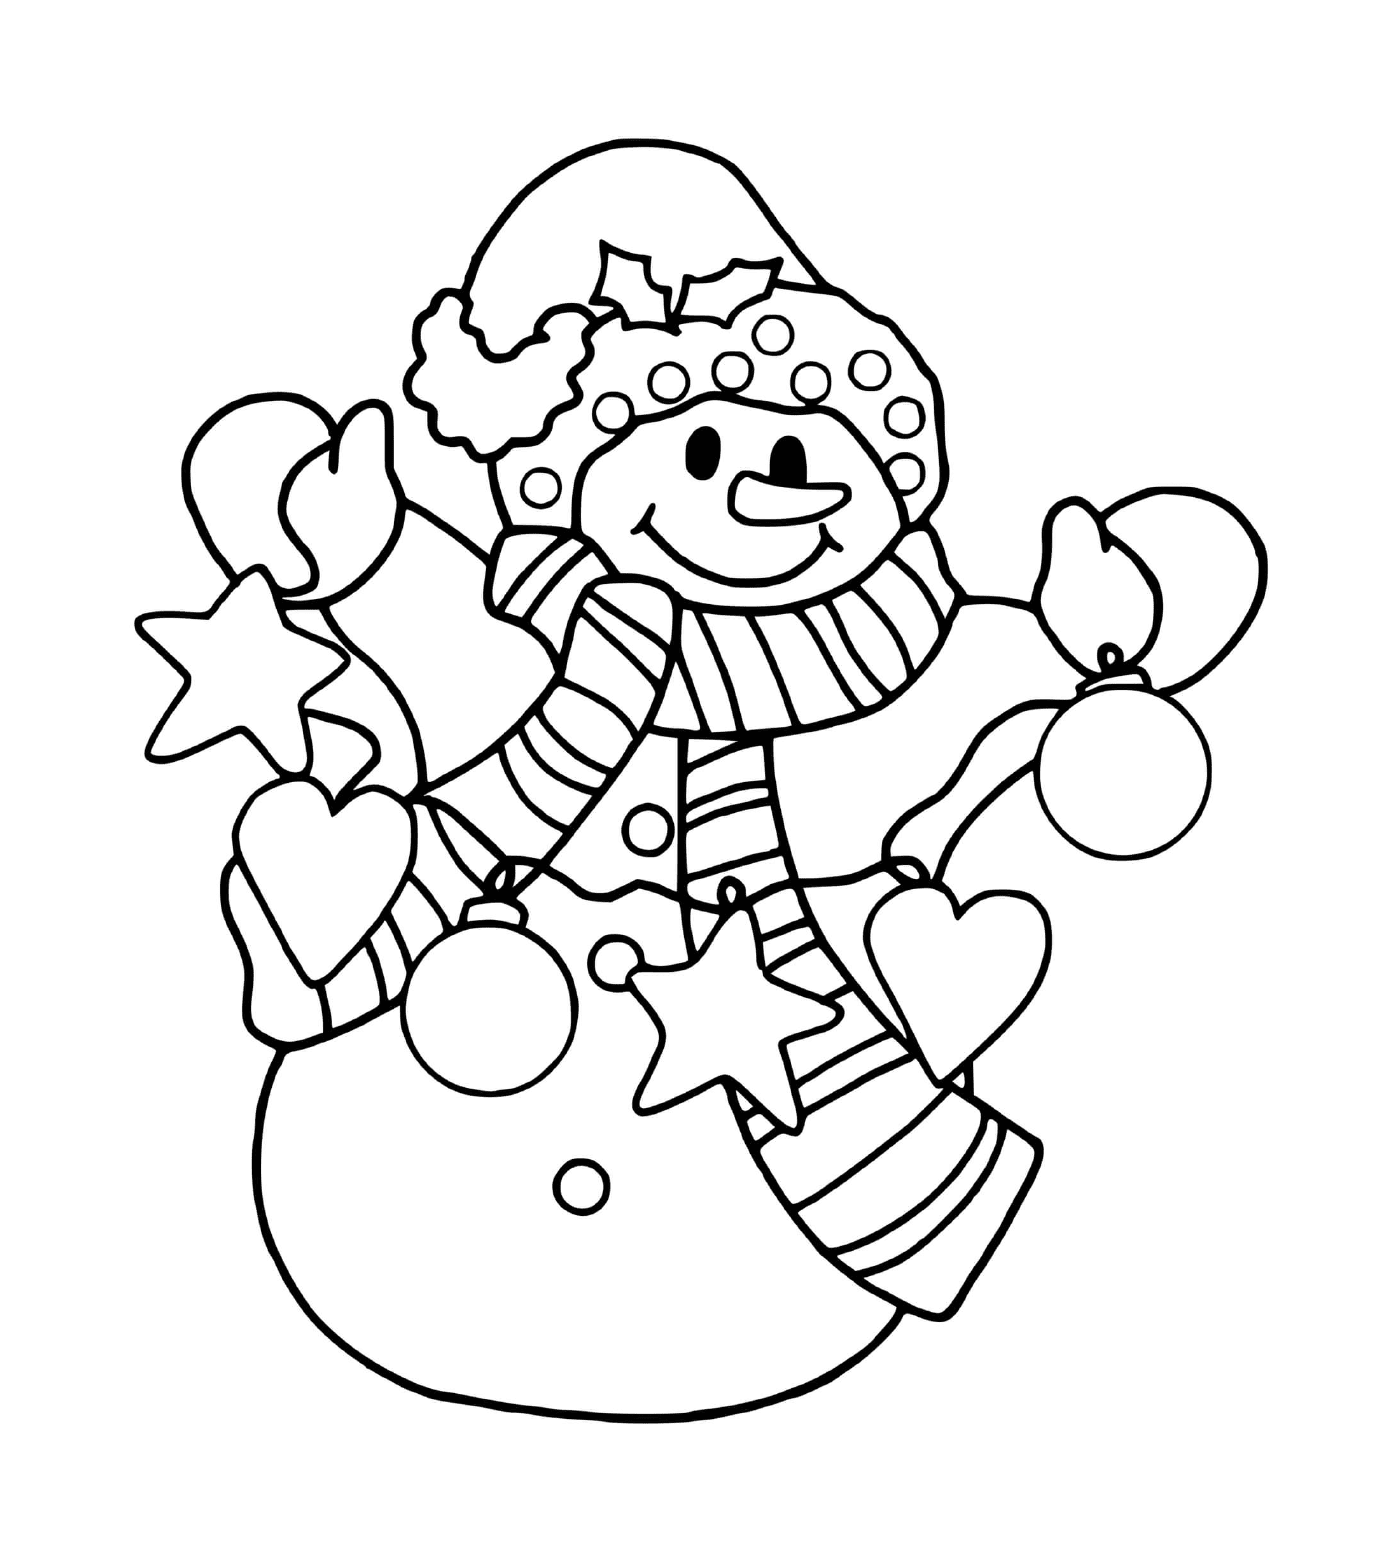  Happy snowman with Christmas decorations 